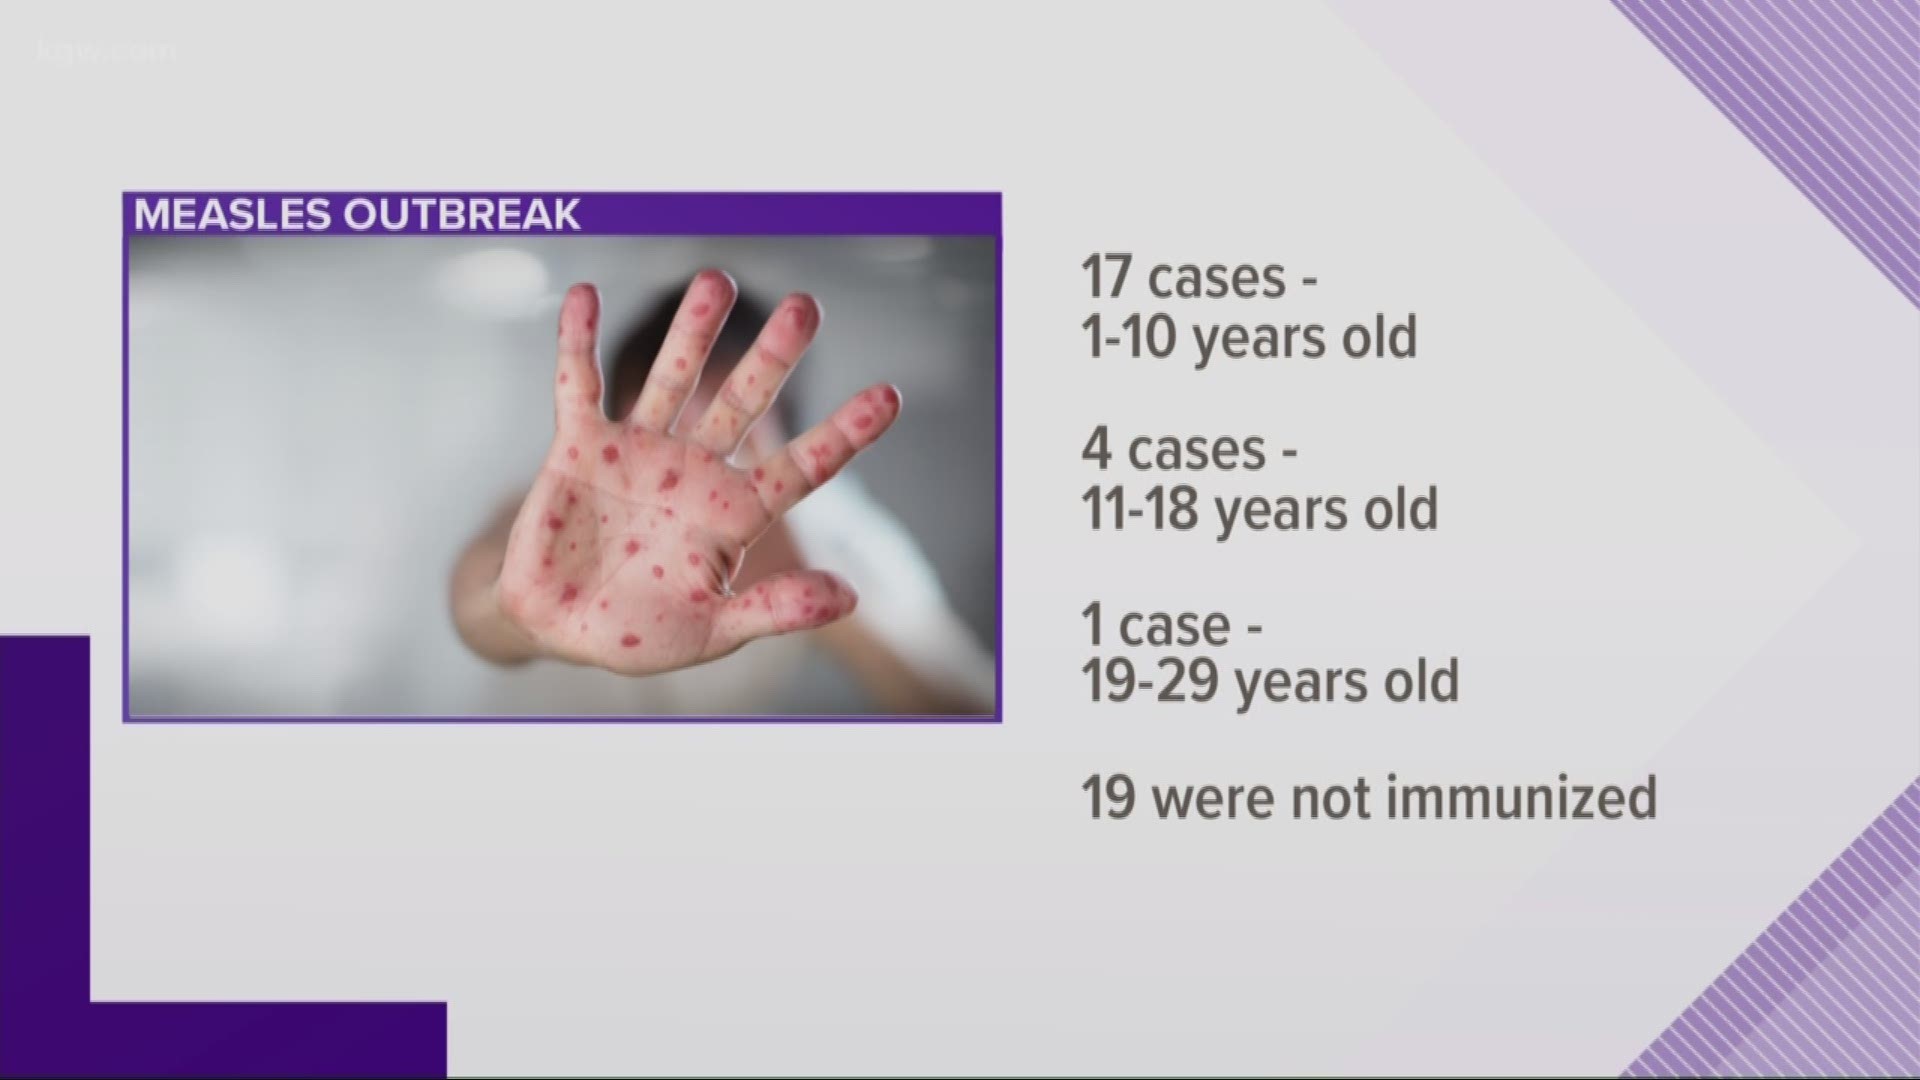 22 confirmed measles cases in Clark County